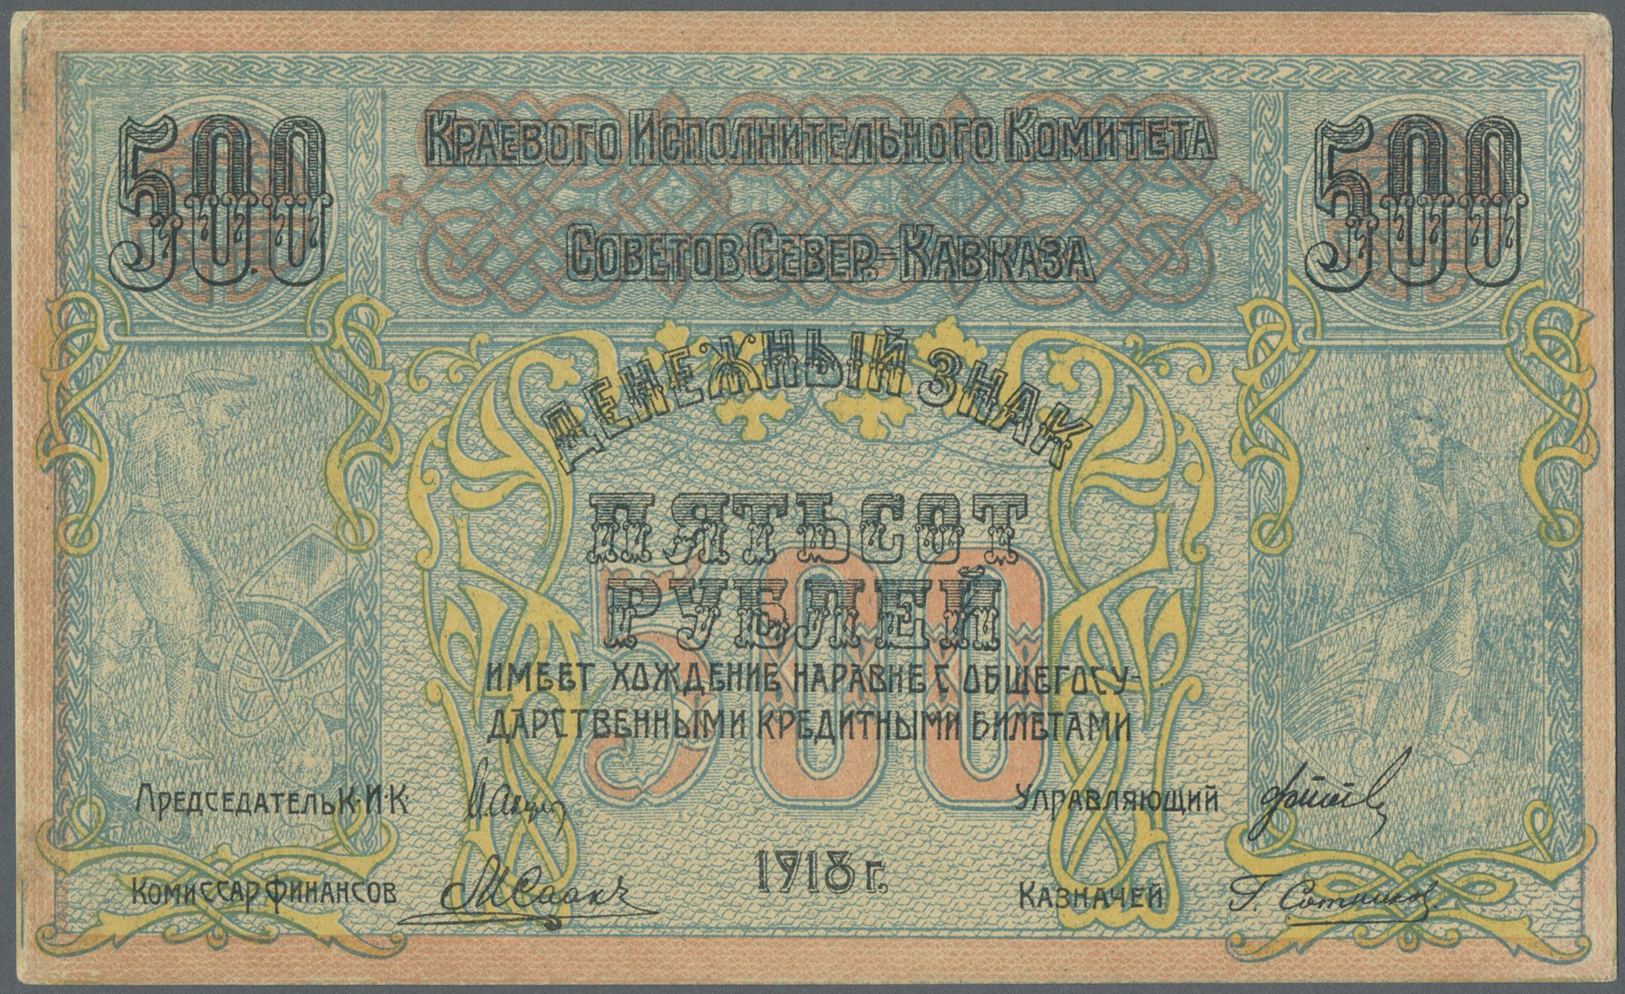 02303 Russia / Russland: Executive Committee Of The North Caucasian Soviet Republic, 500 Rubles 1918, P.S460, Very Nice - Russia